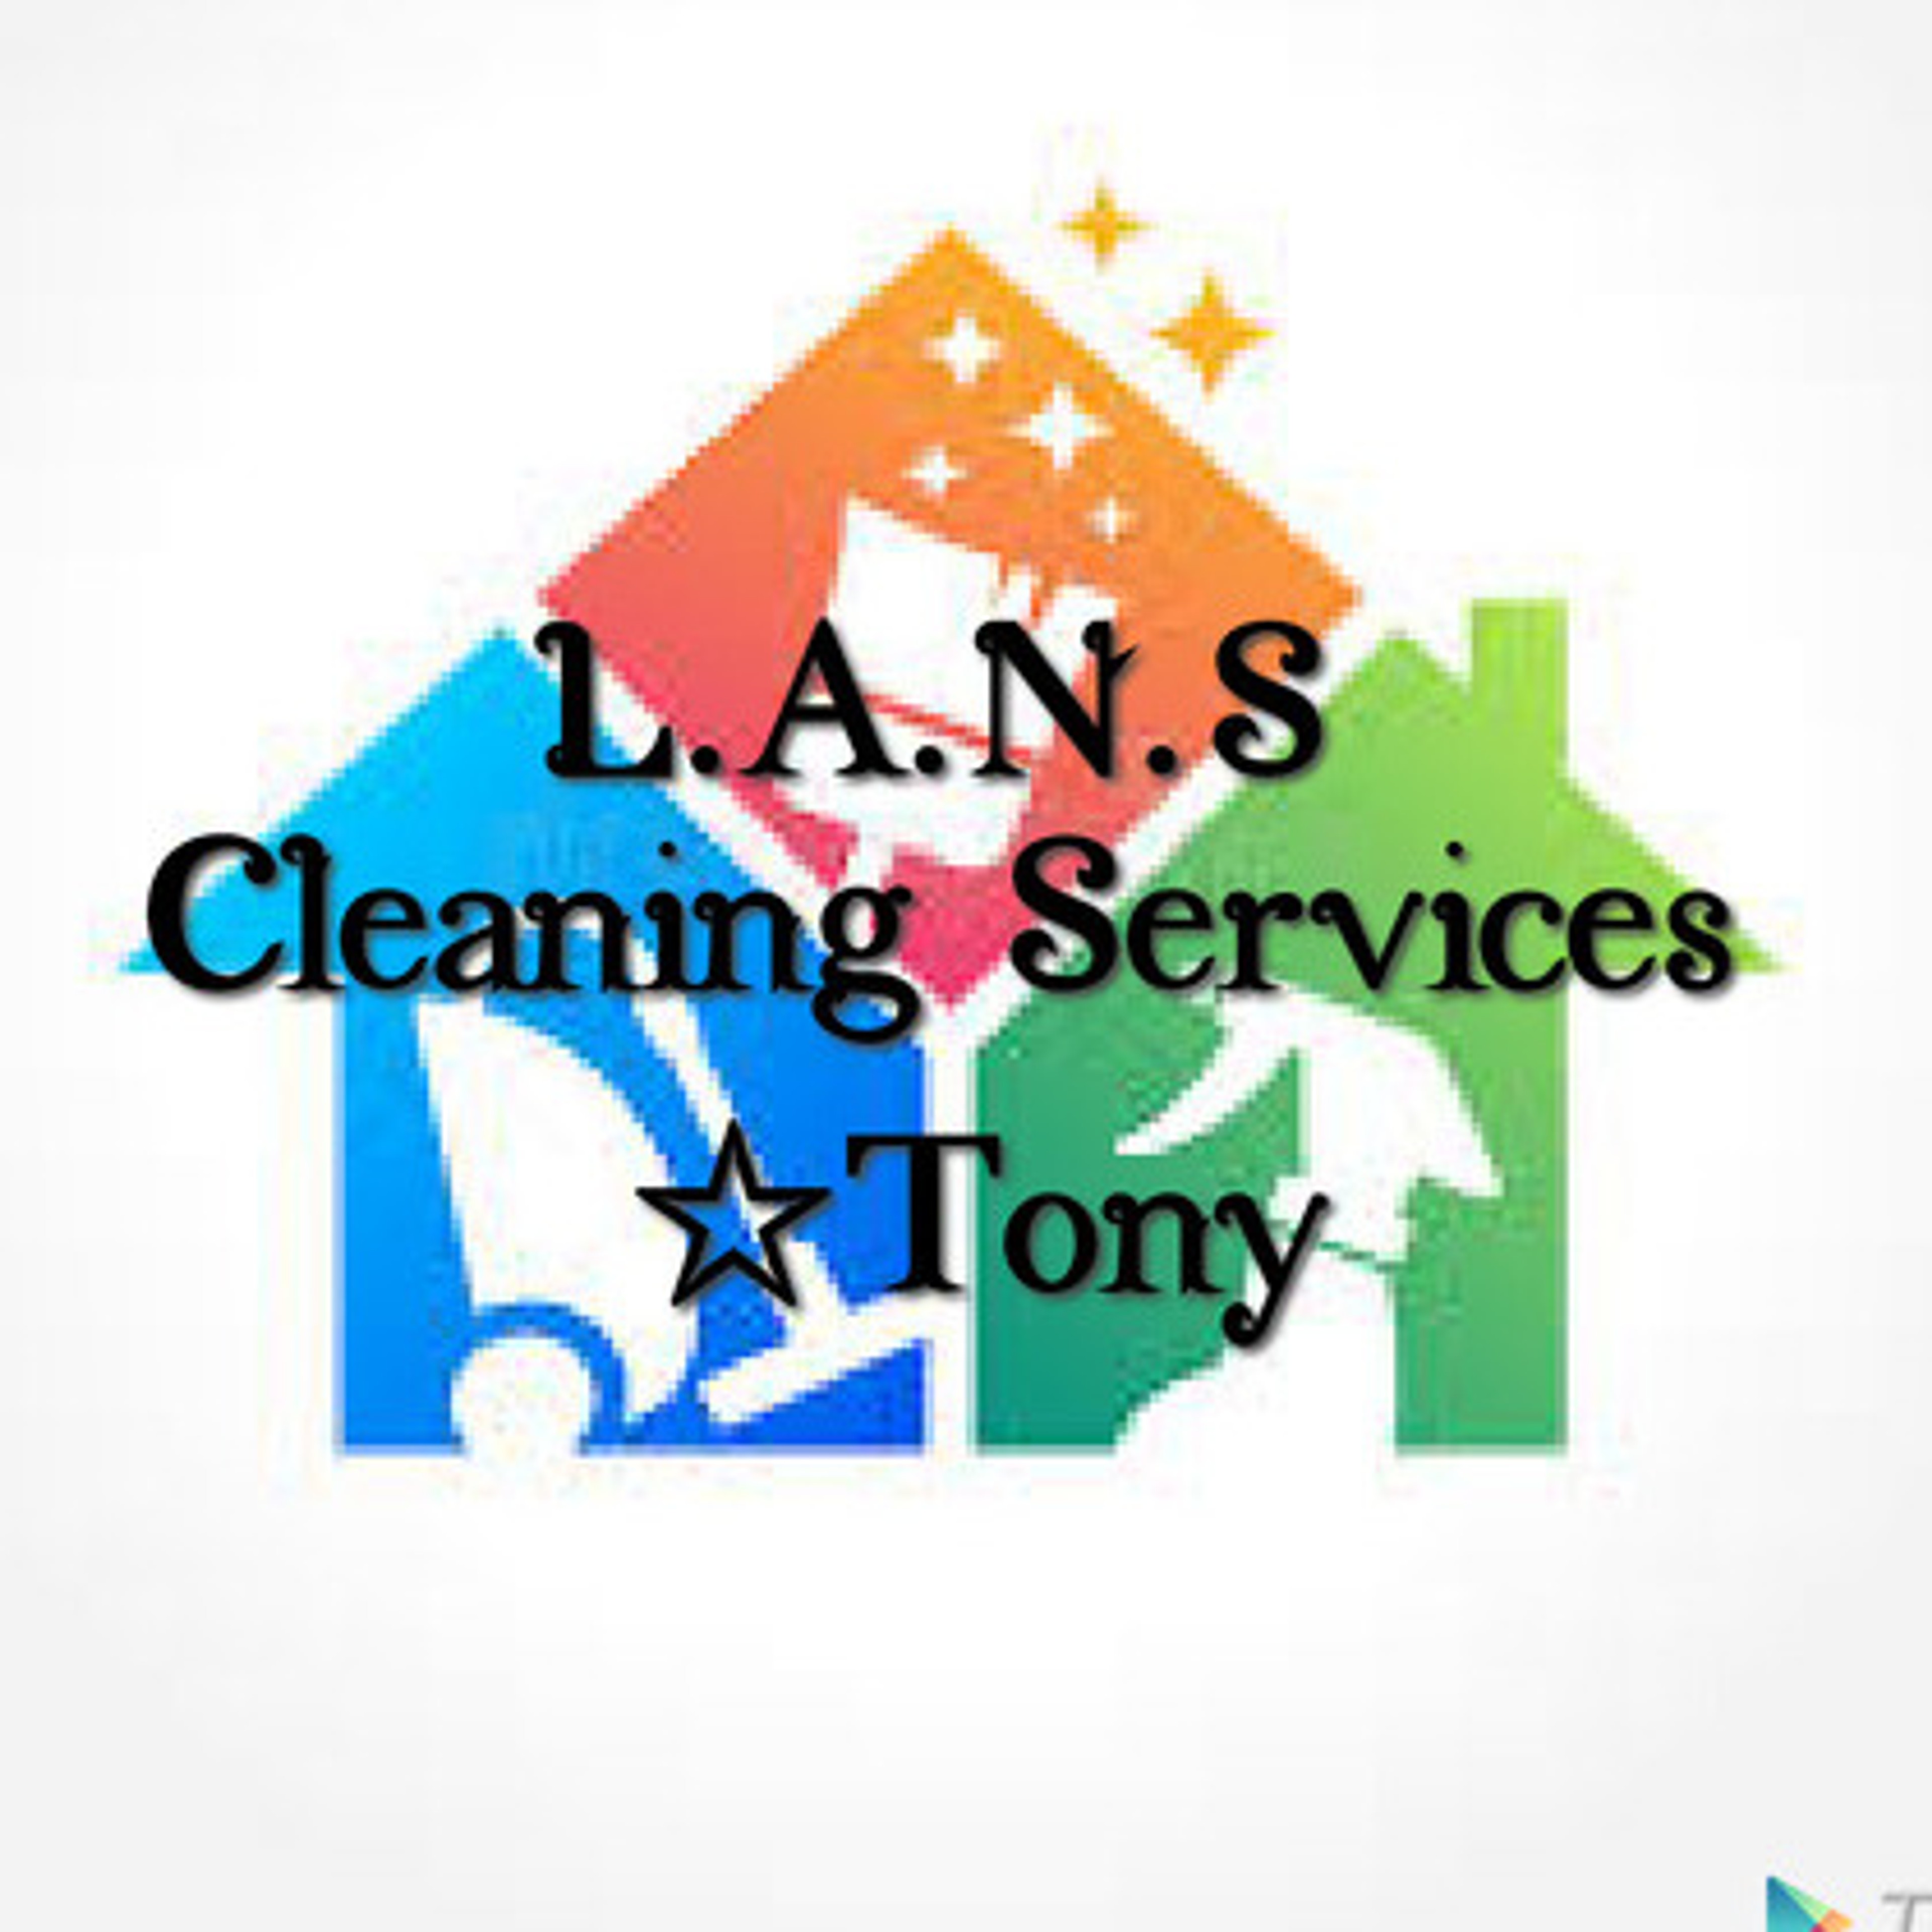 L.A.N.S Cleaning Service and Pressure Washer...we do Home-Ofices-Apartment cleaning , Murfreesboro ,Nashville and more.